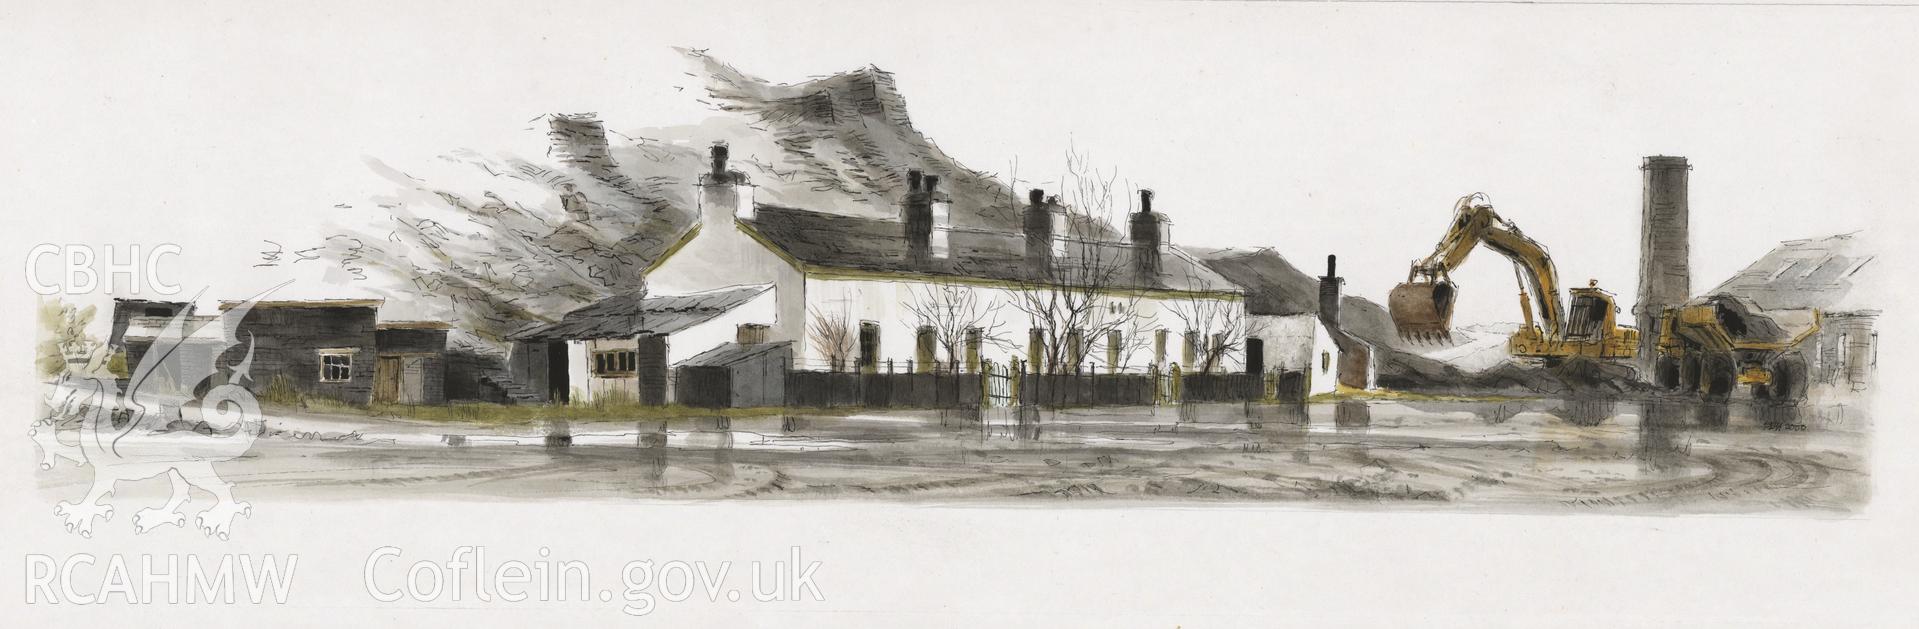 Gloddfa Ganol Cottages - Exterior with Digger: (pencil, ink and watercolour) drawing.